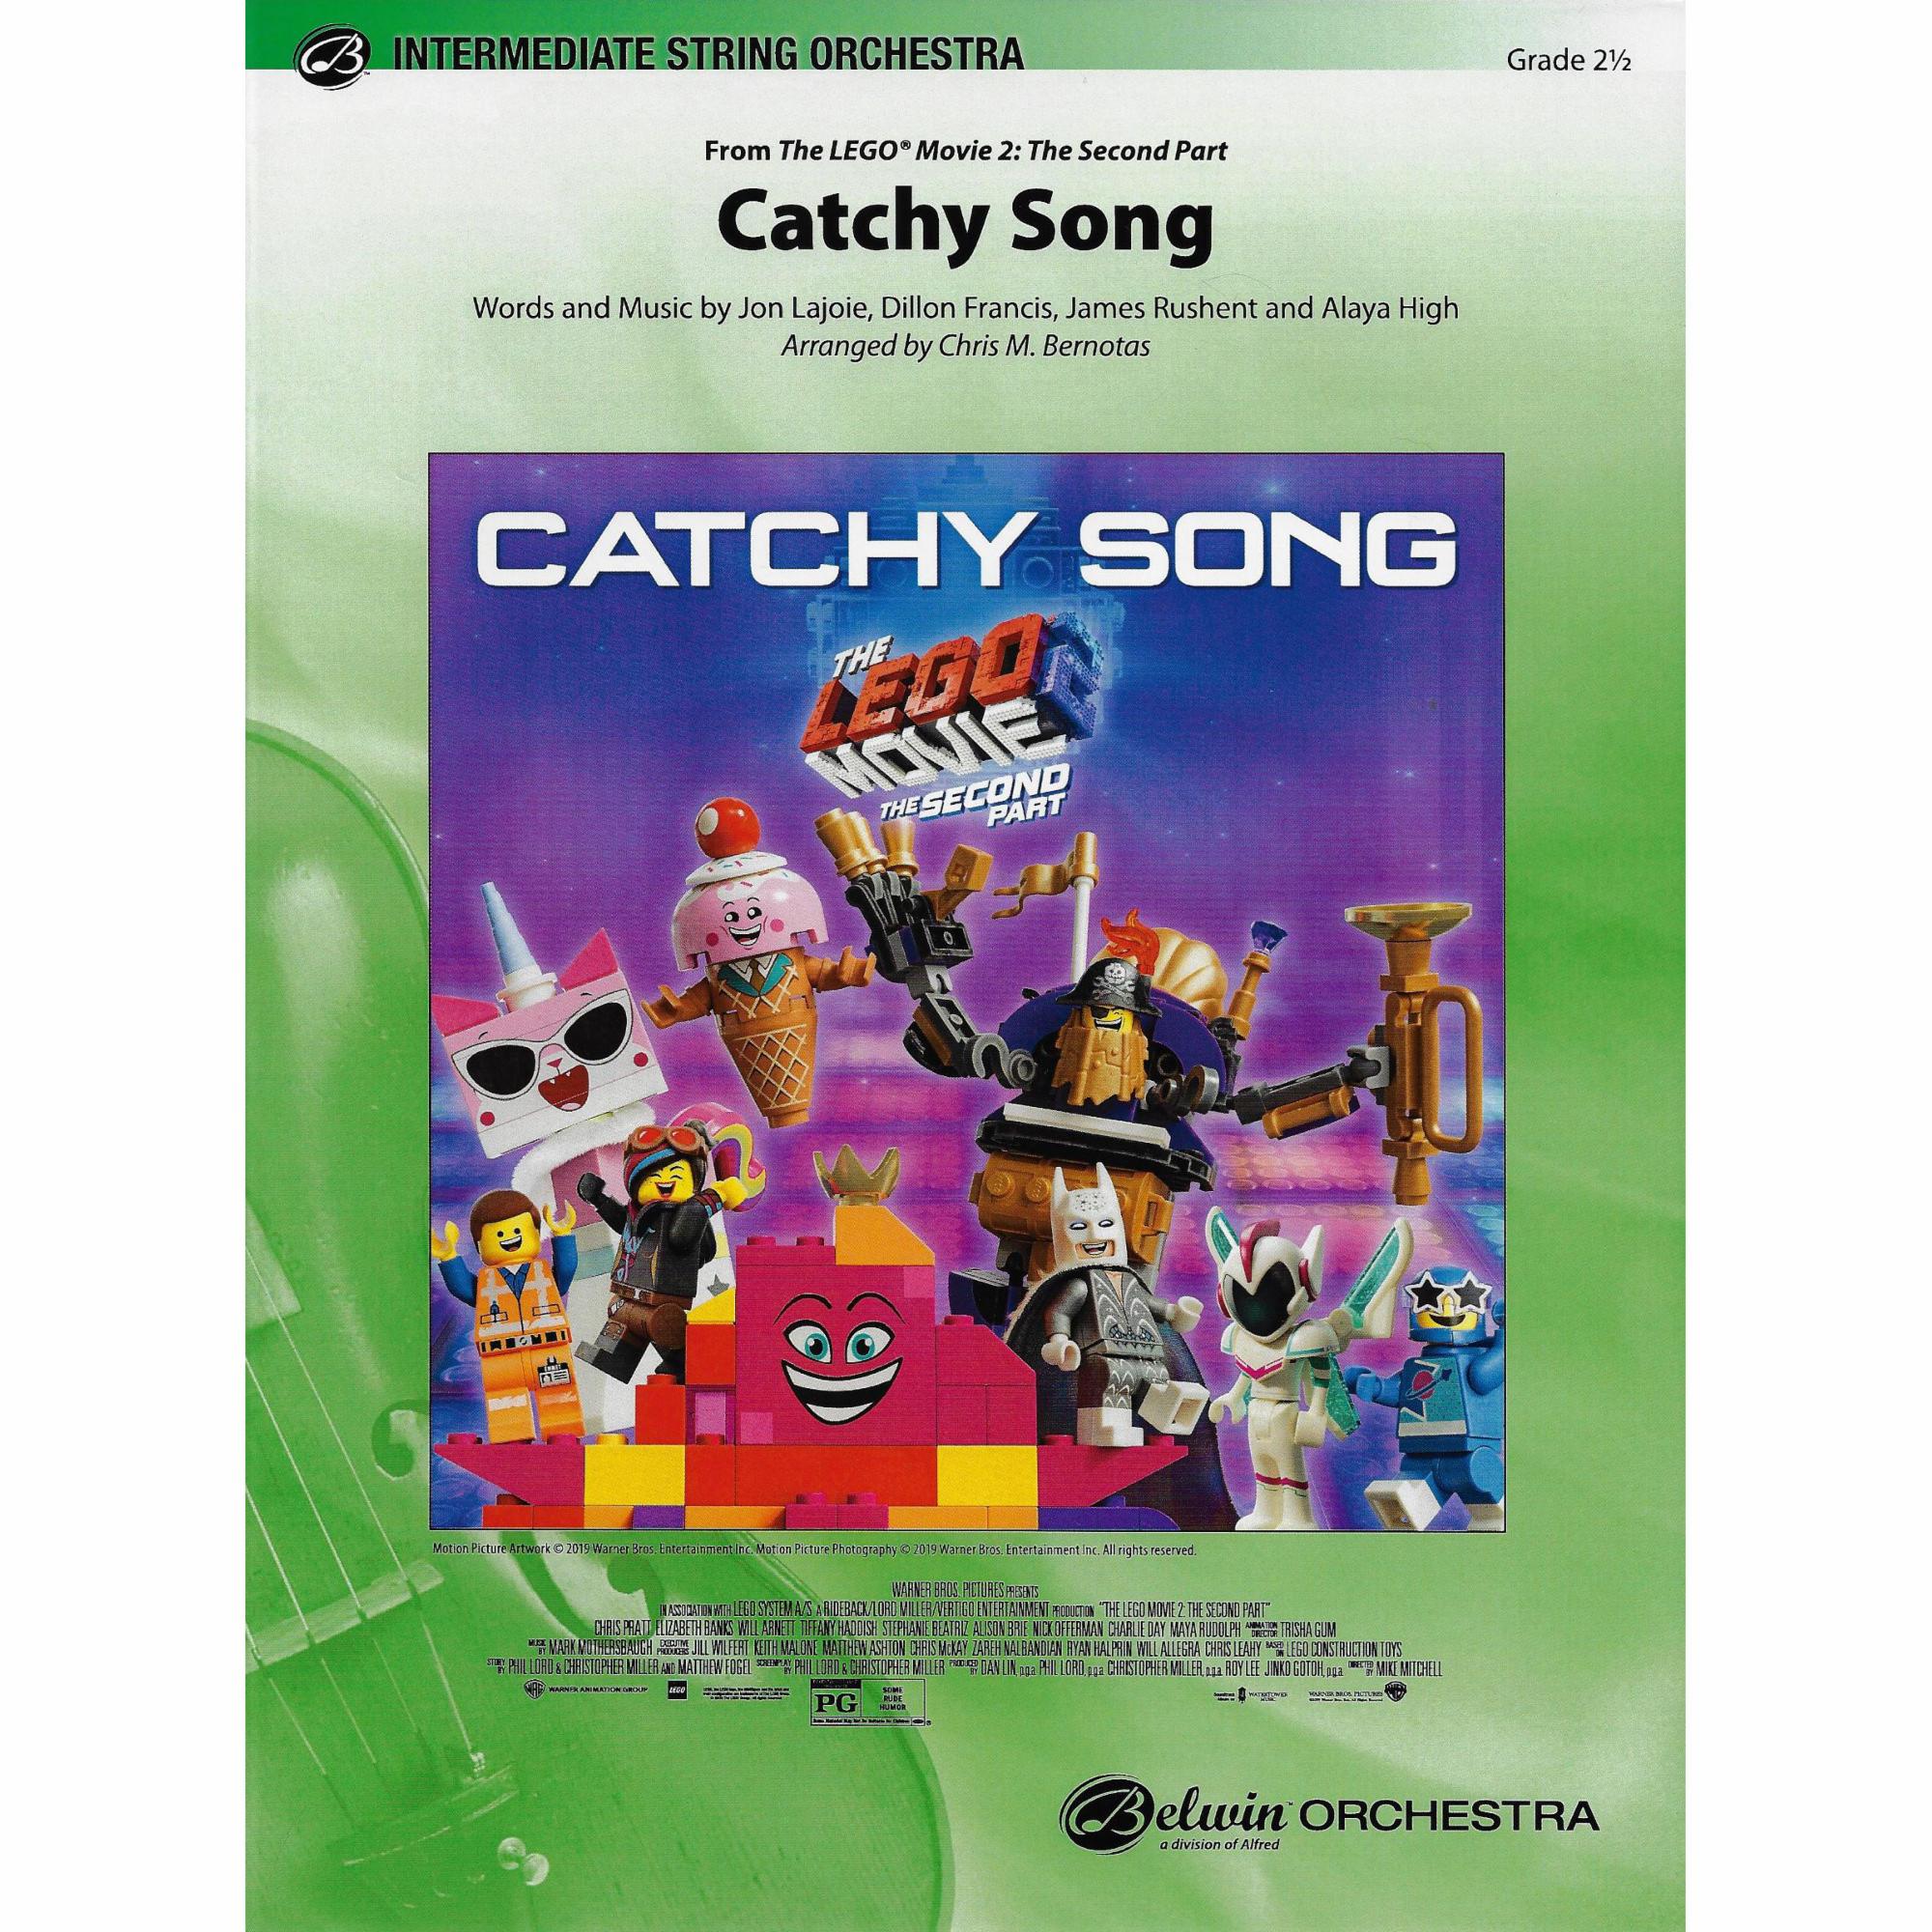 Catchy Song, from The LEGO Movie 2 for String Orchestra